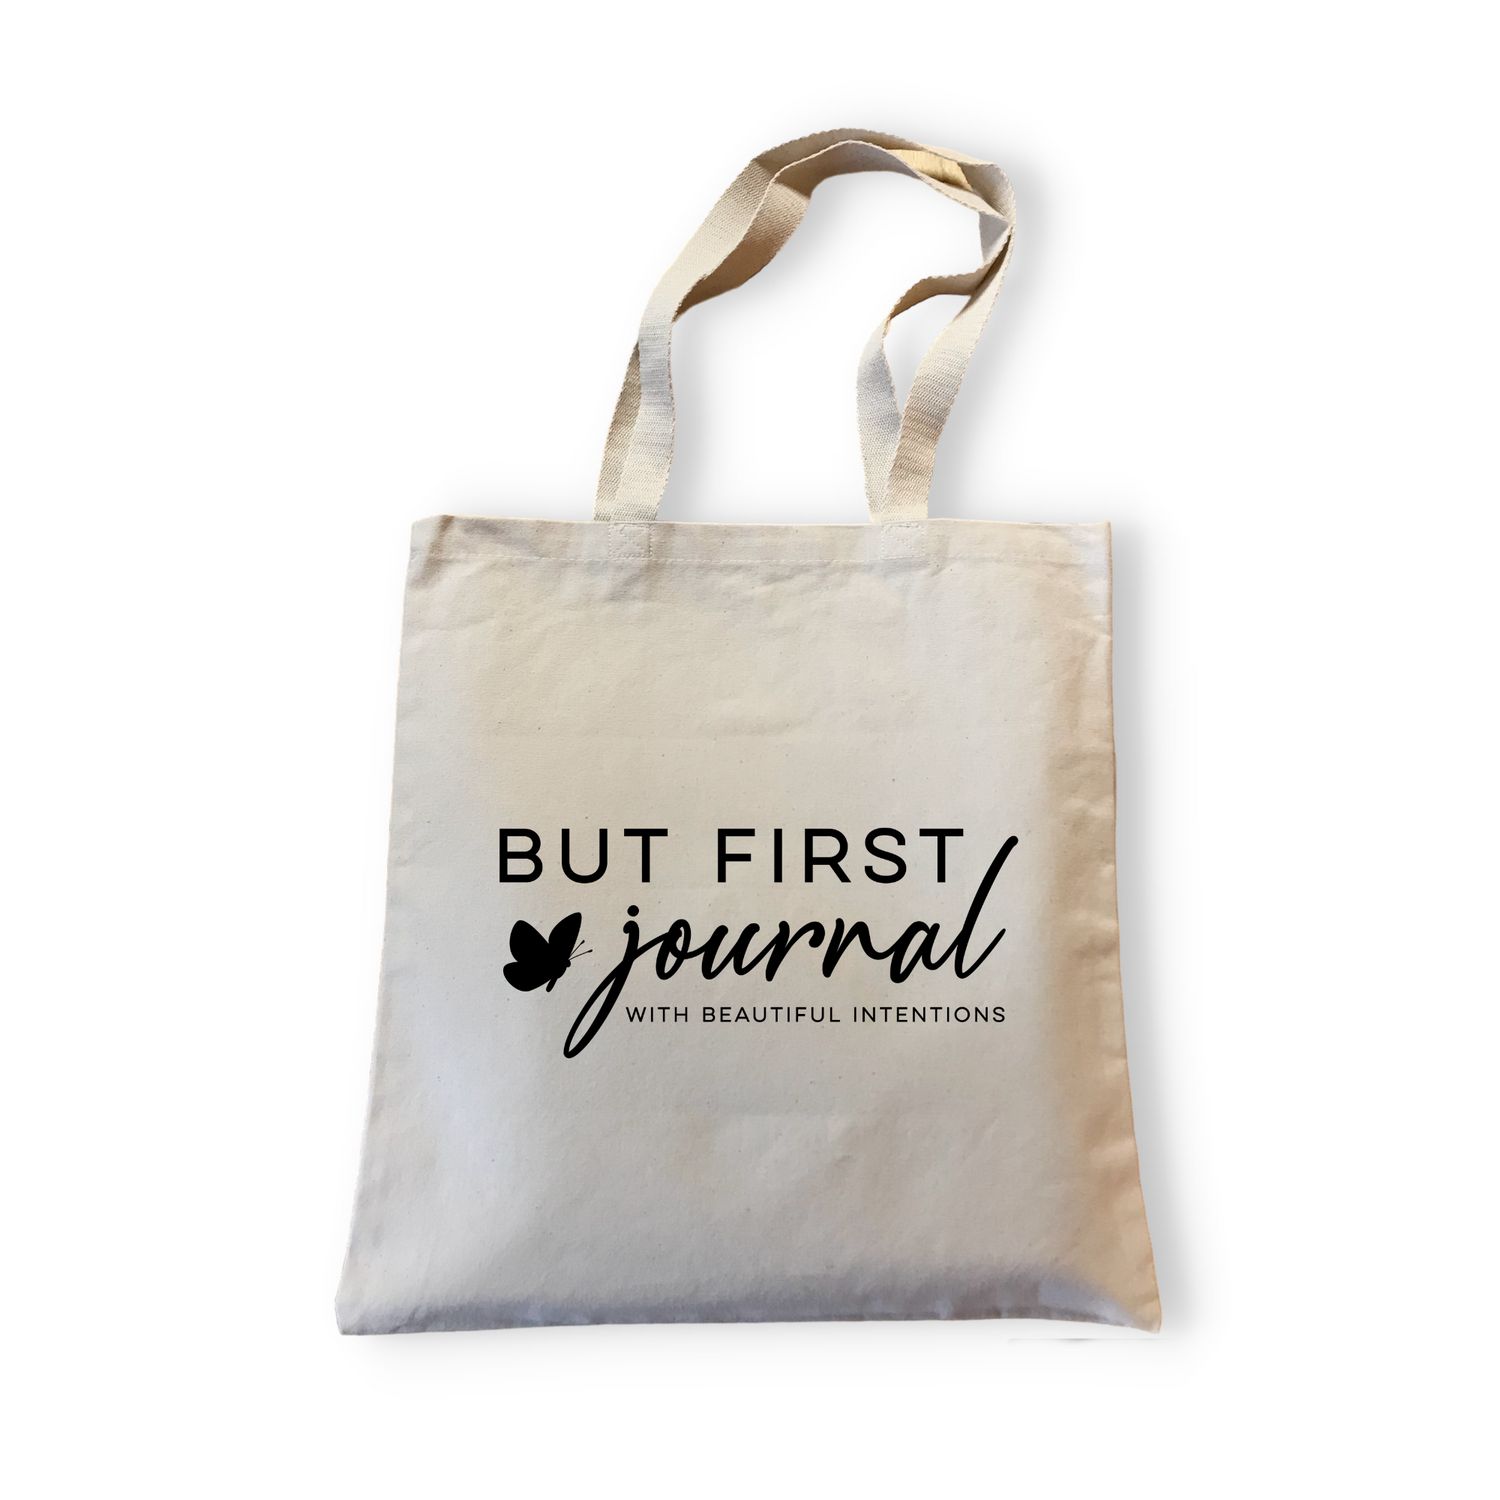 Personalized Tote Bags with Business Logo